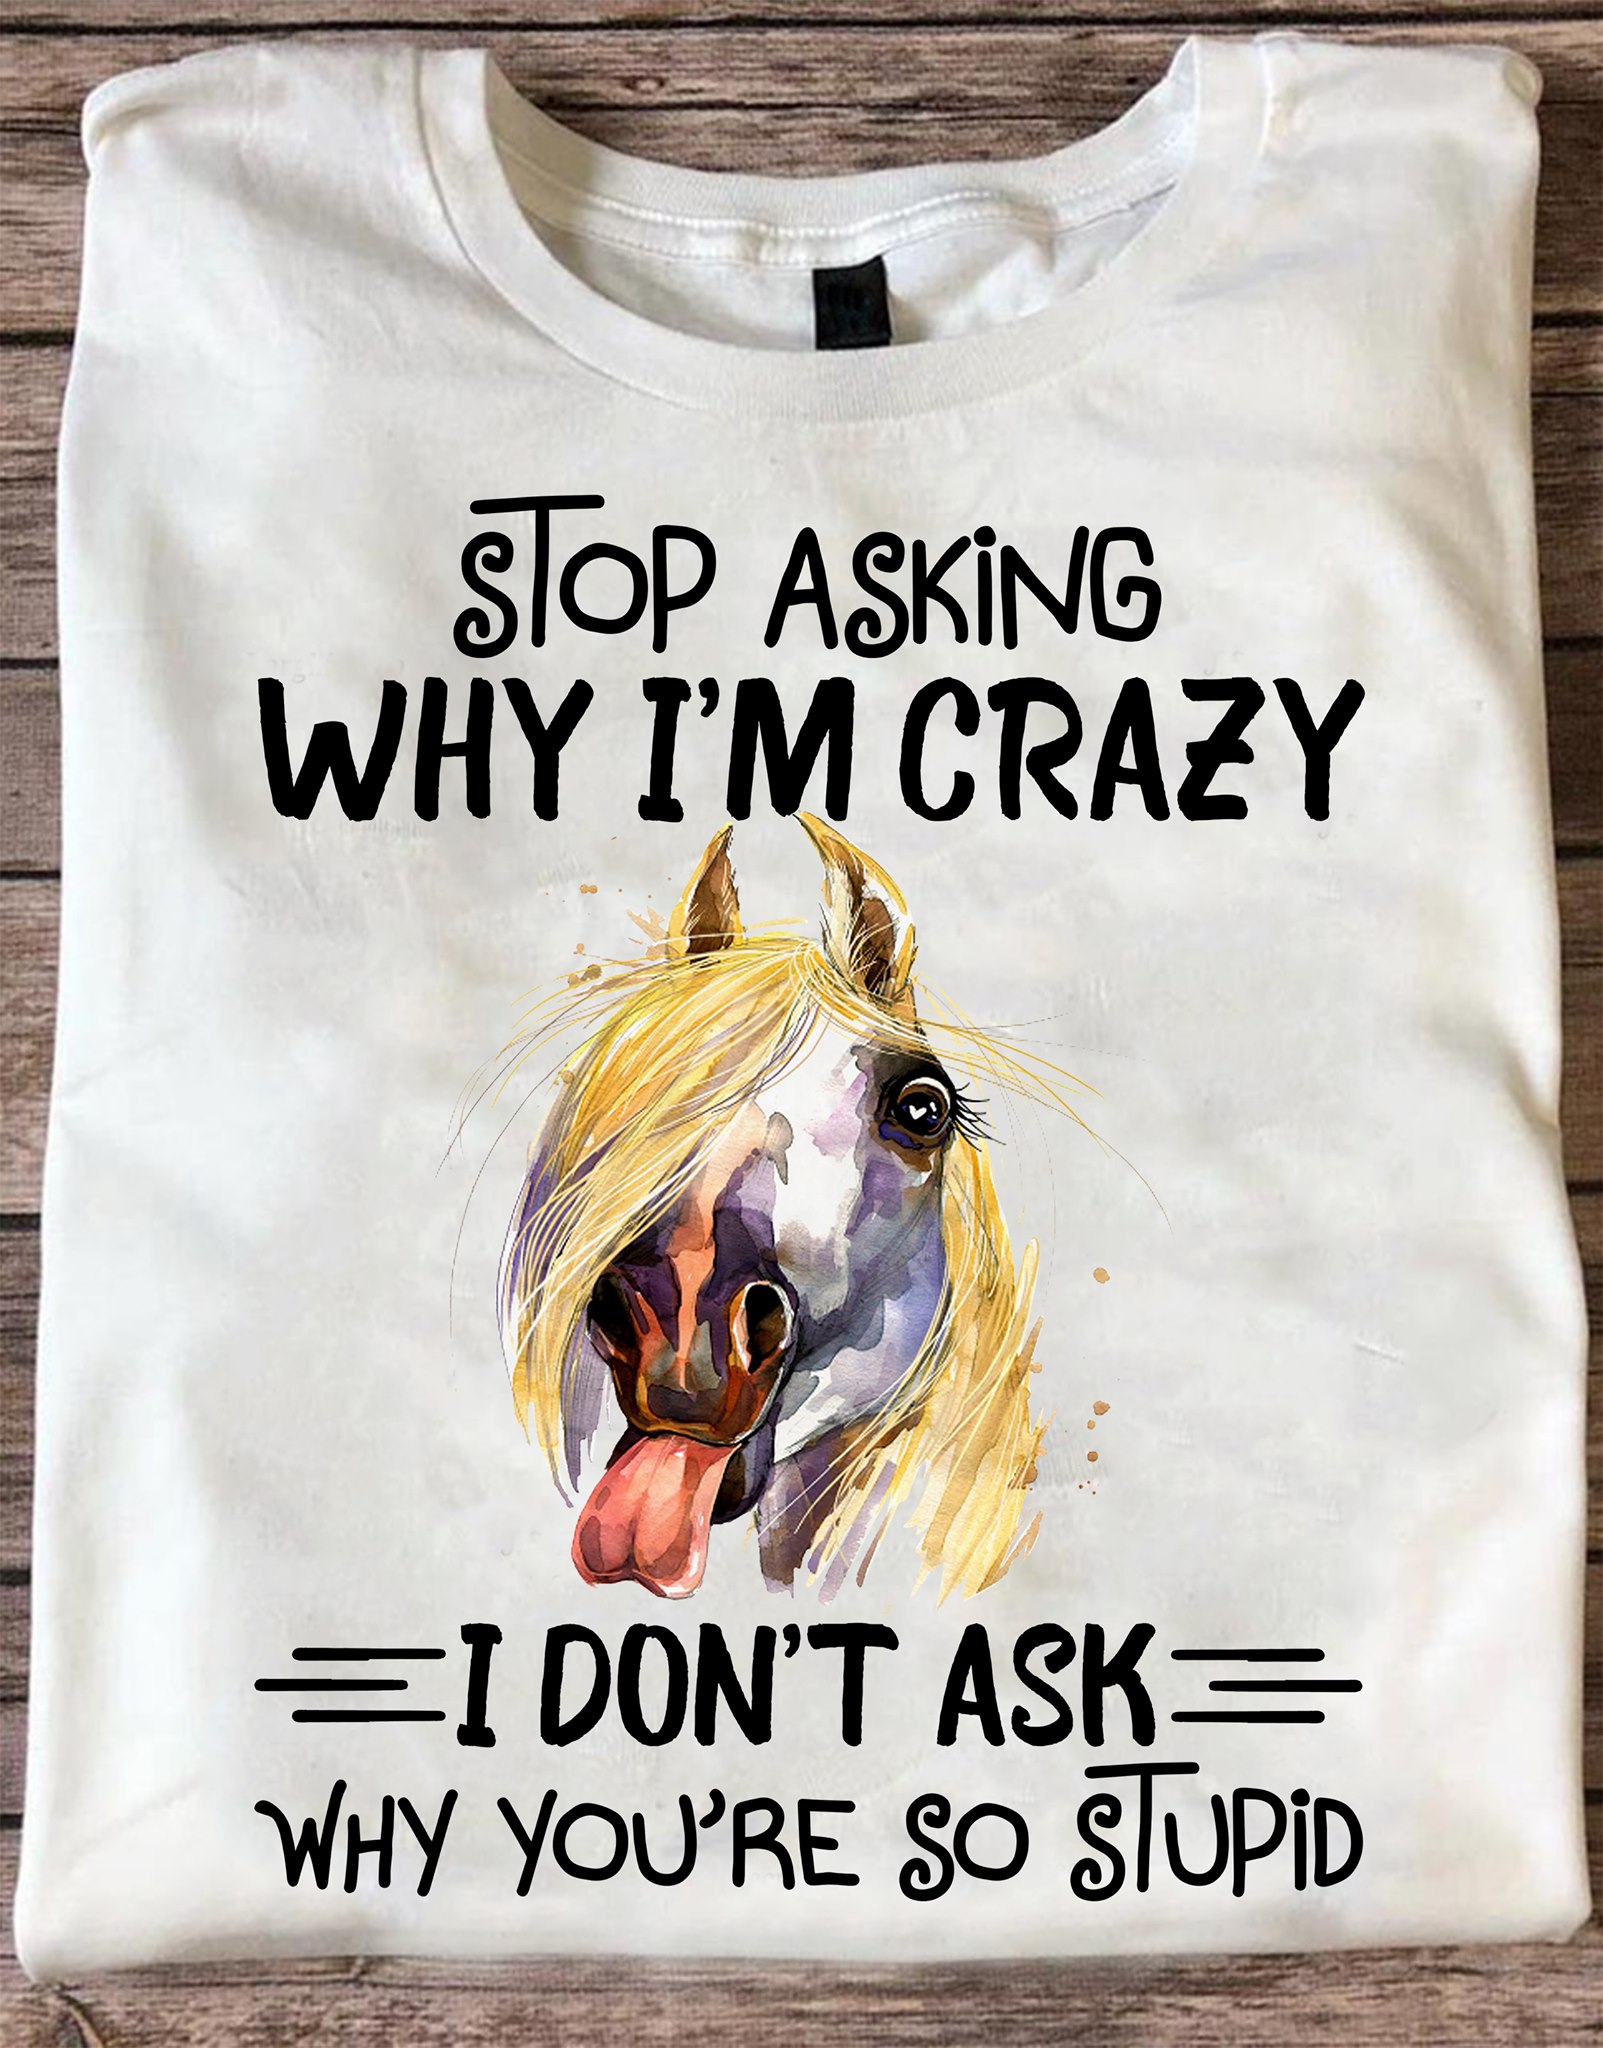 Stop asking why I'm crazy I don't ask why you're so stupid - Grumpy horse